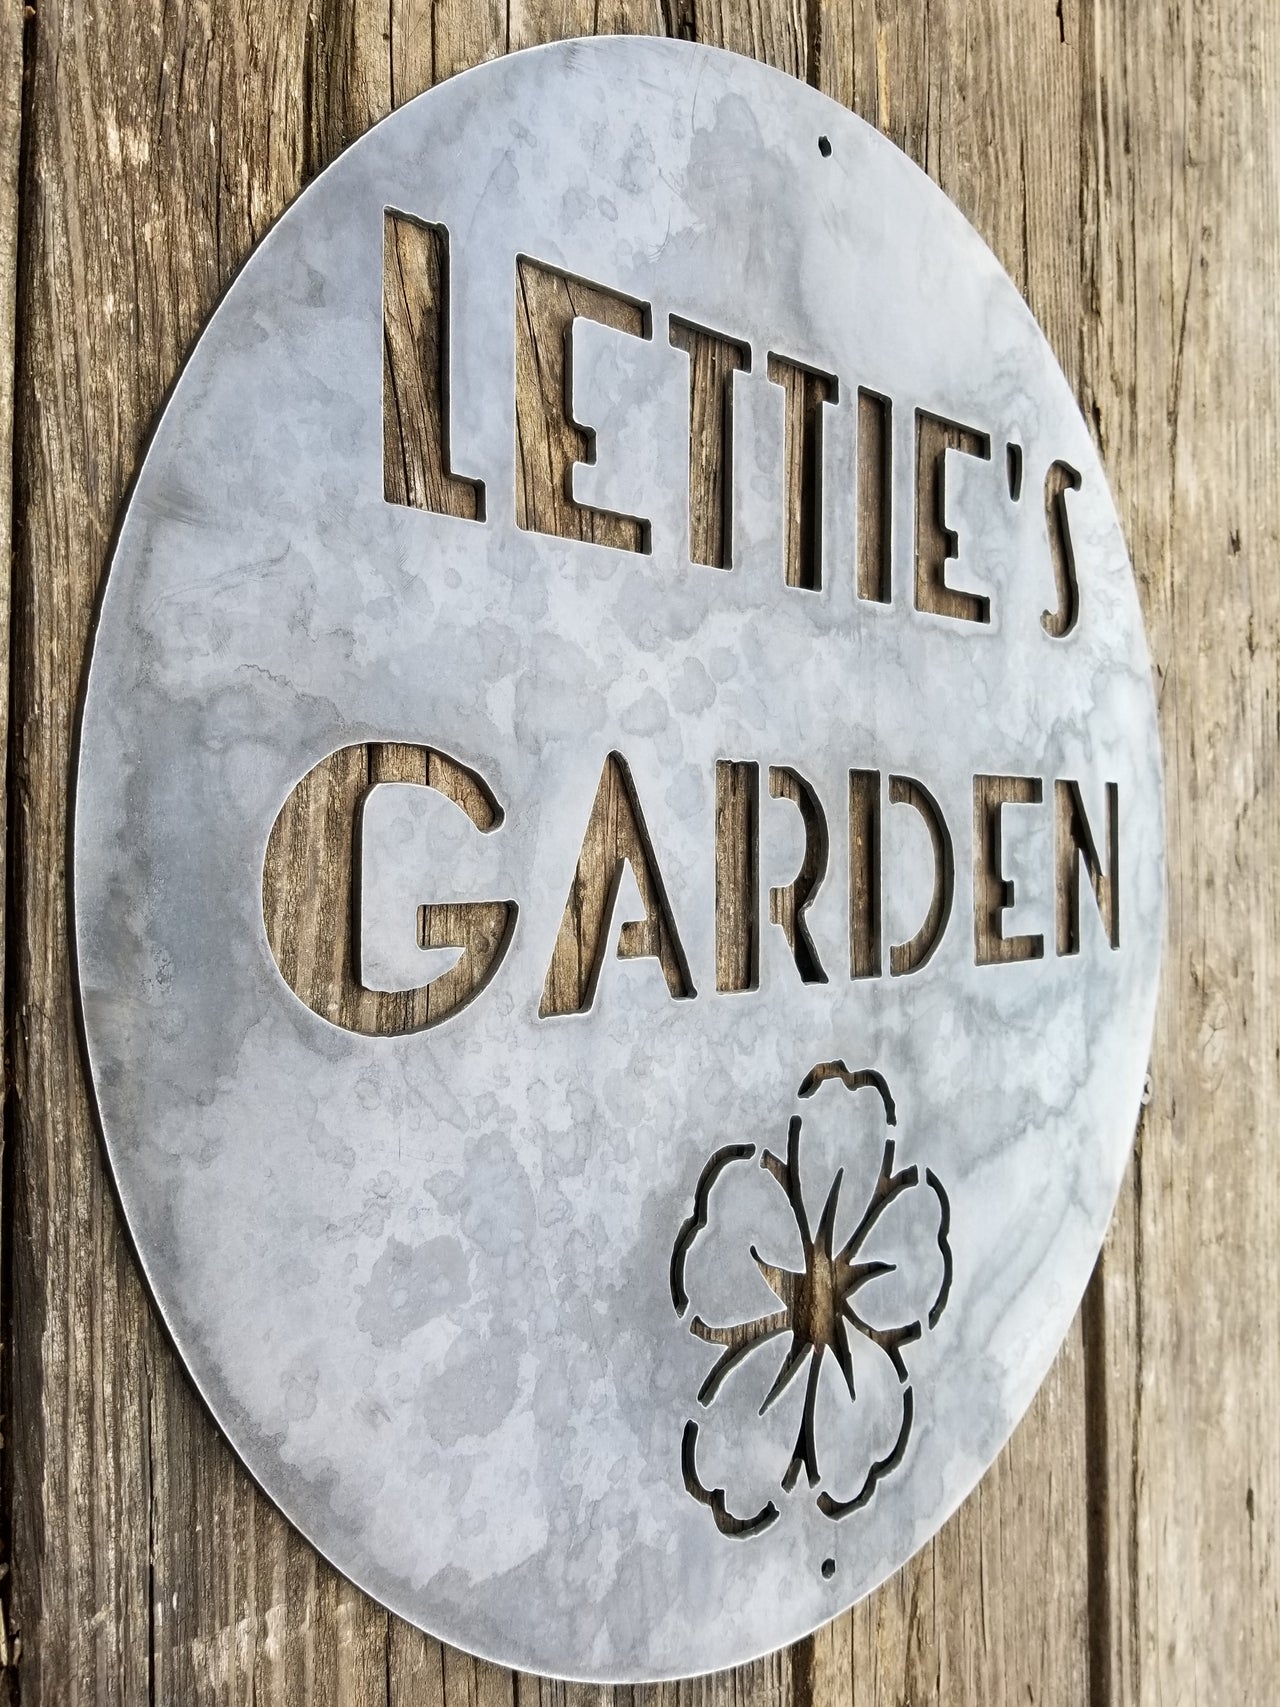 This is a round sign with an image of a flower below two lines of text which read, "Lettie's Garden".